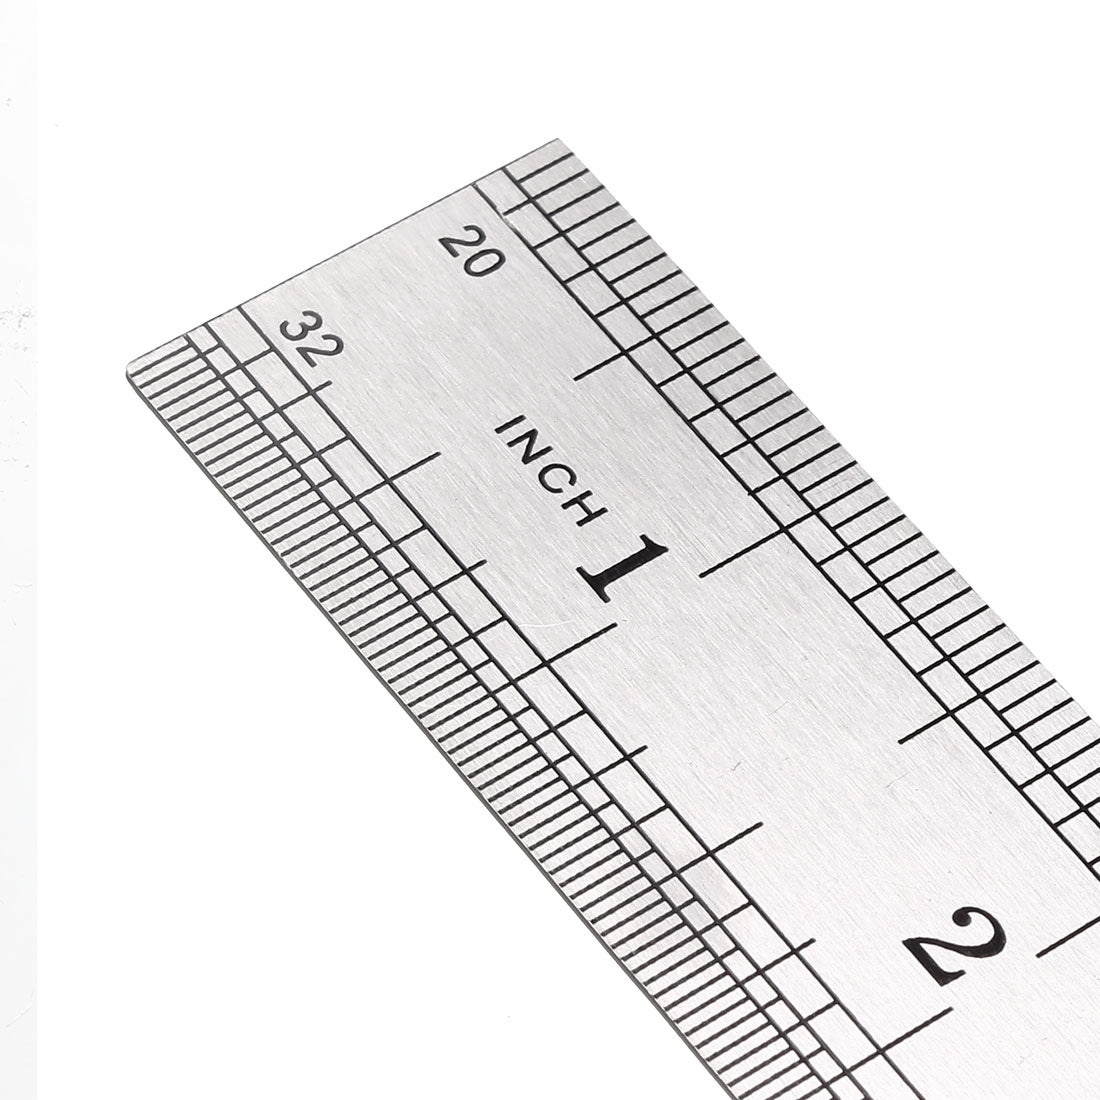 uxcell Uxcell Stainless Steel Ruler 12-inch (30cm) Straight Ruler Inches and Metric Scale 5pcs